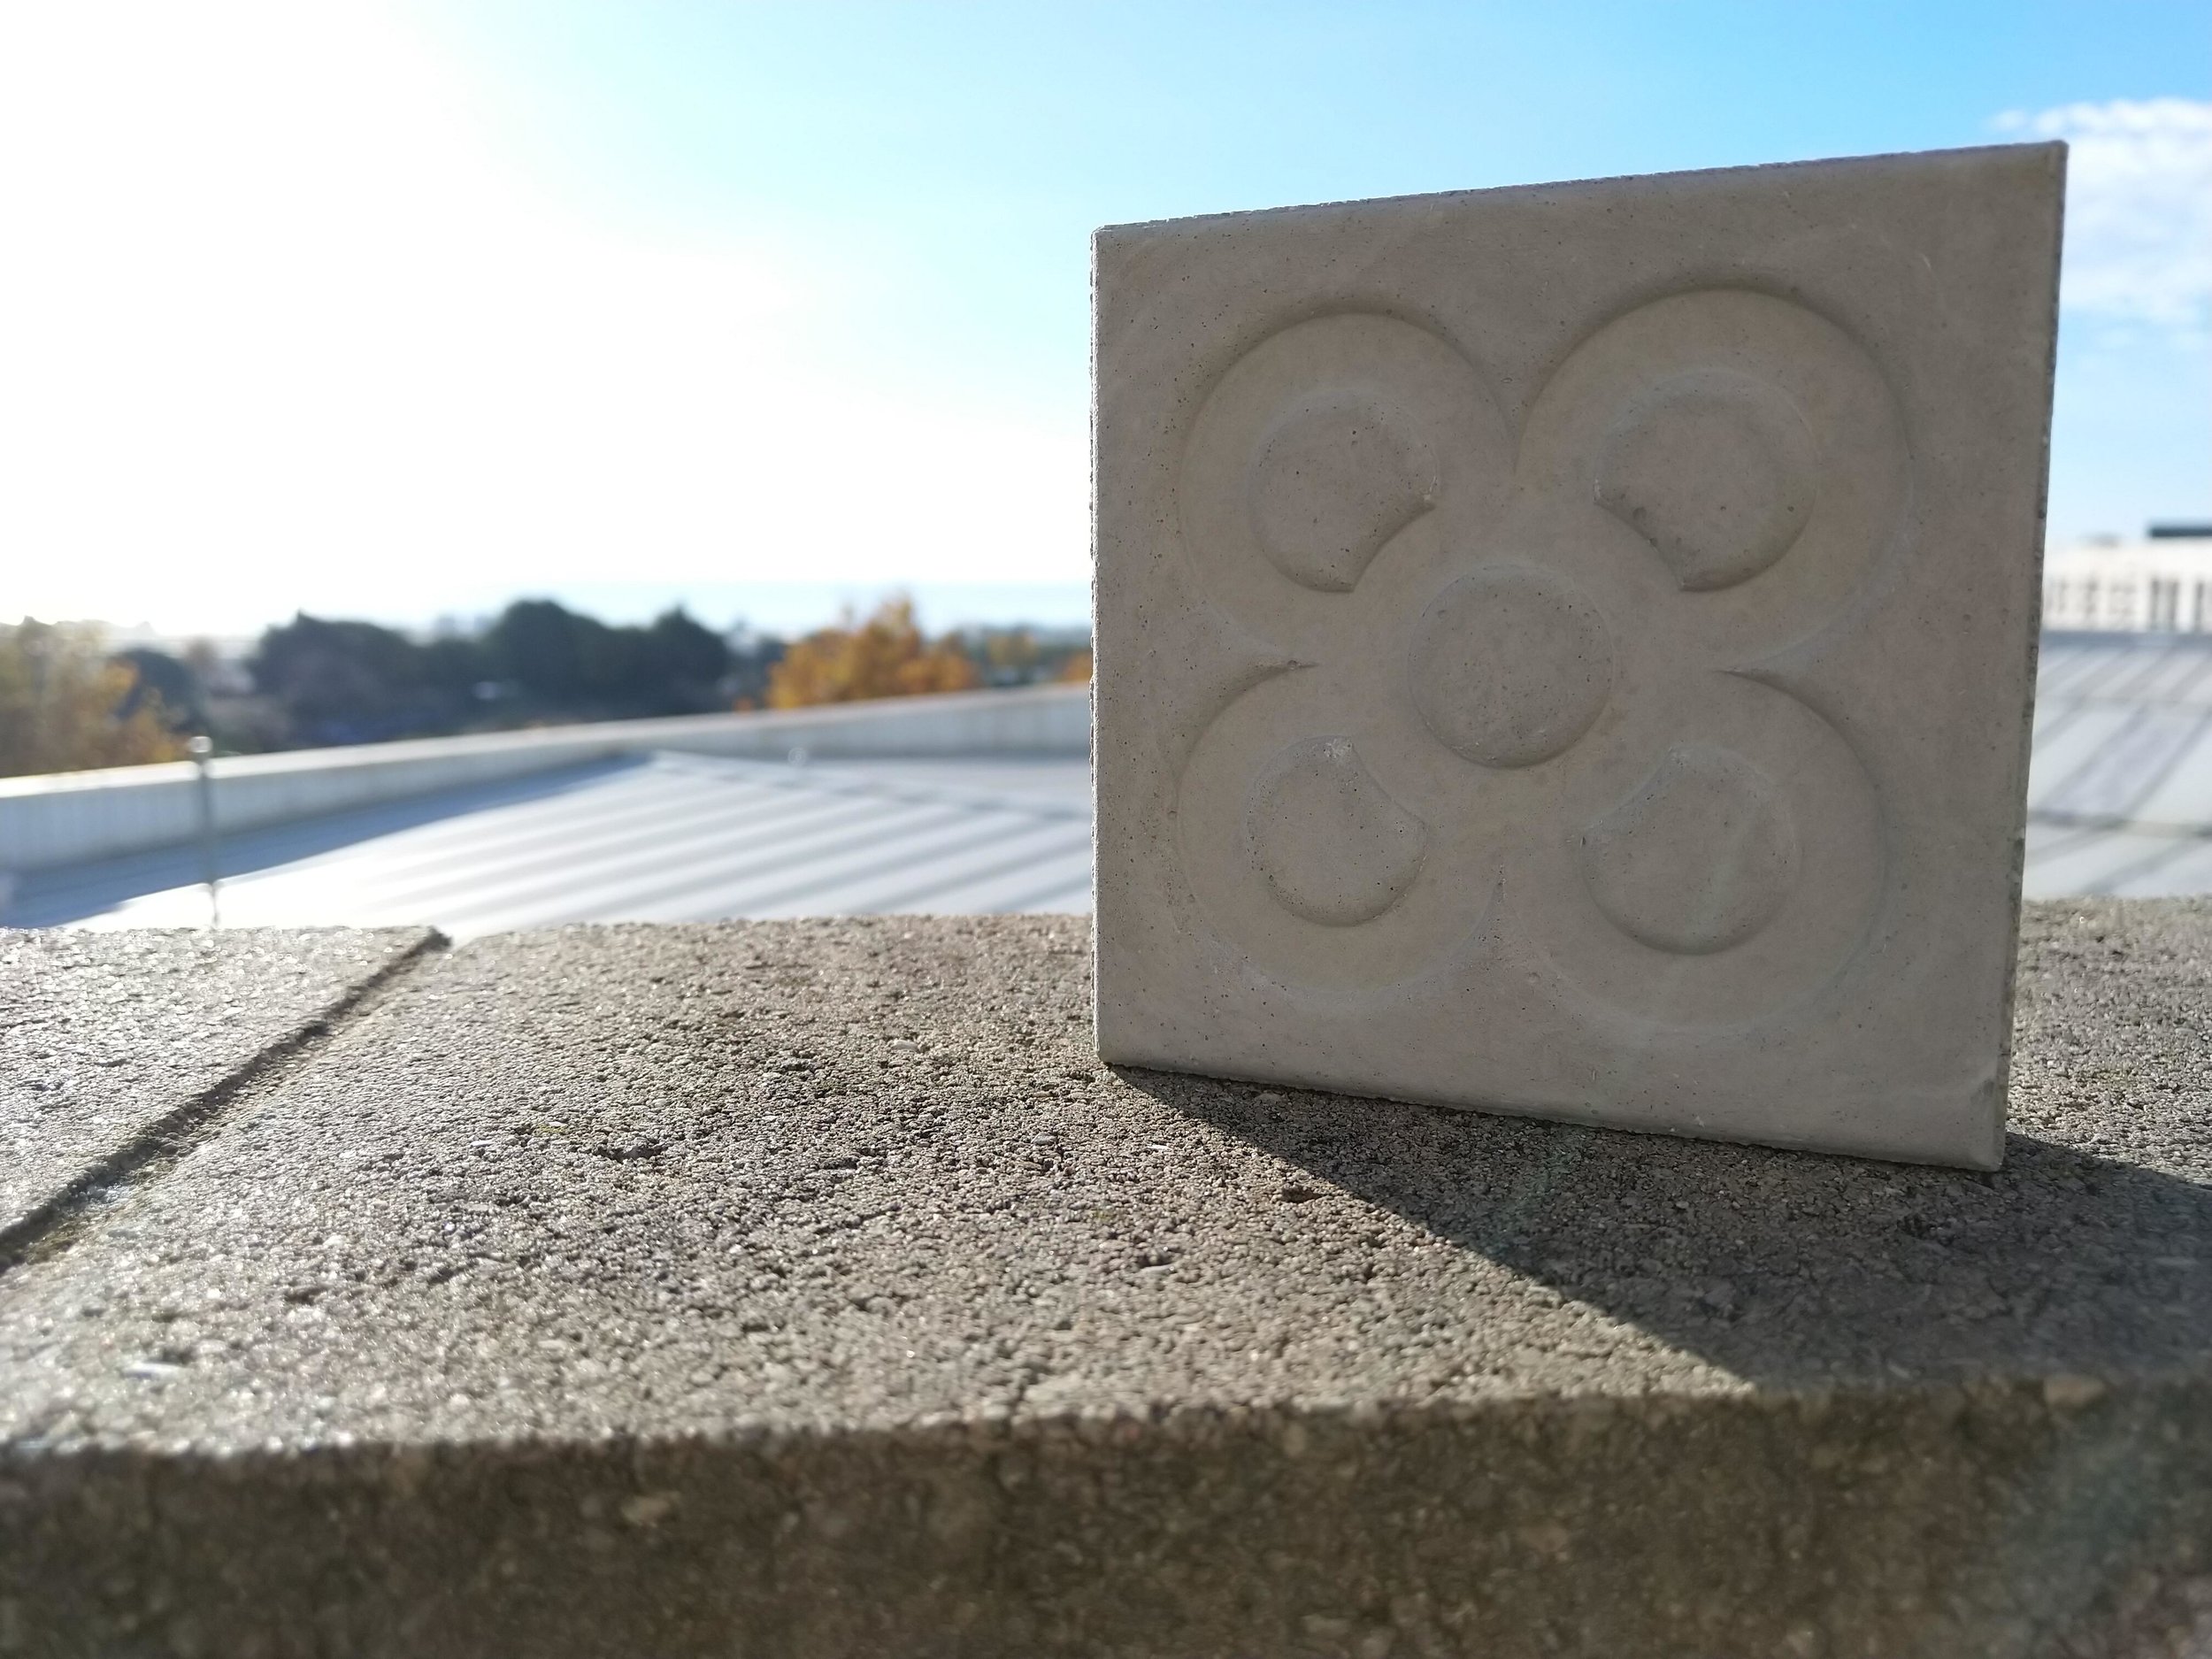  Concrete produced with 3D printing byproducts [Image: FICEP S3] 